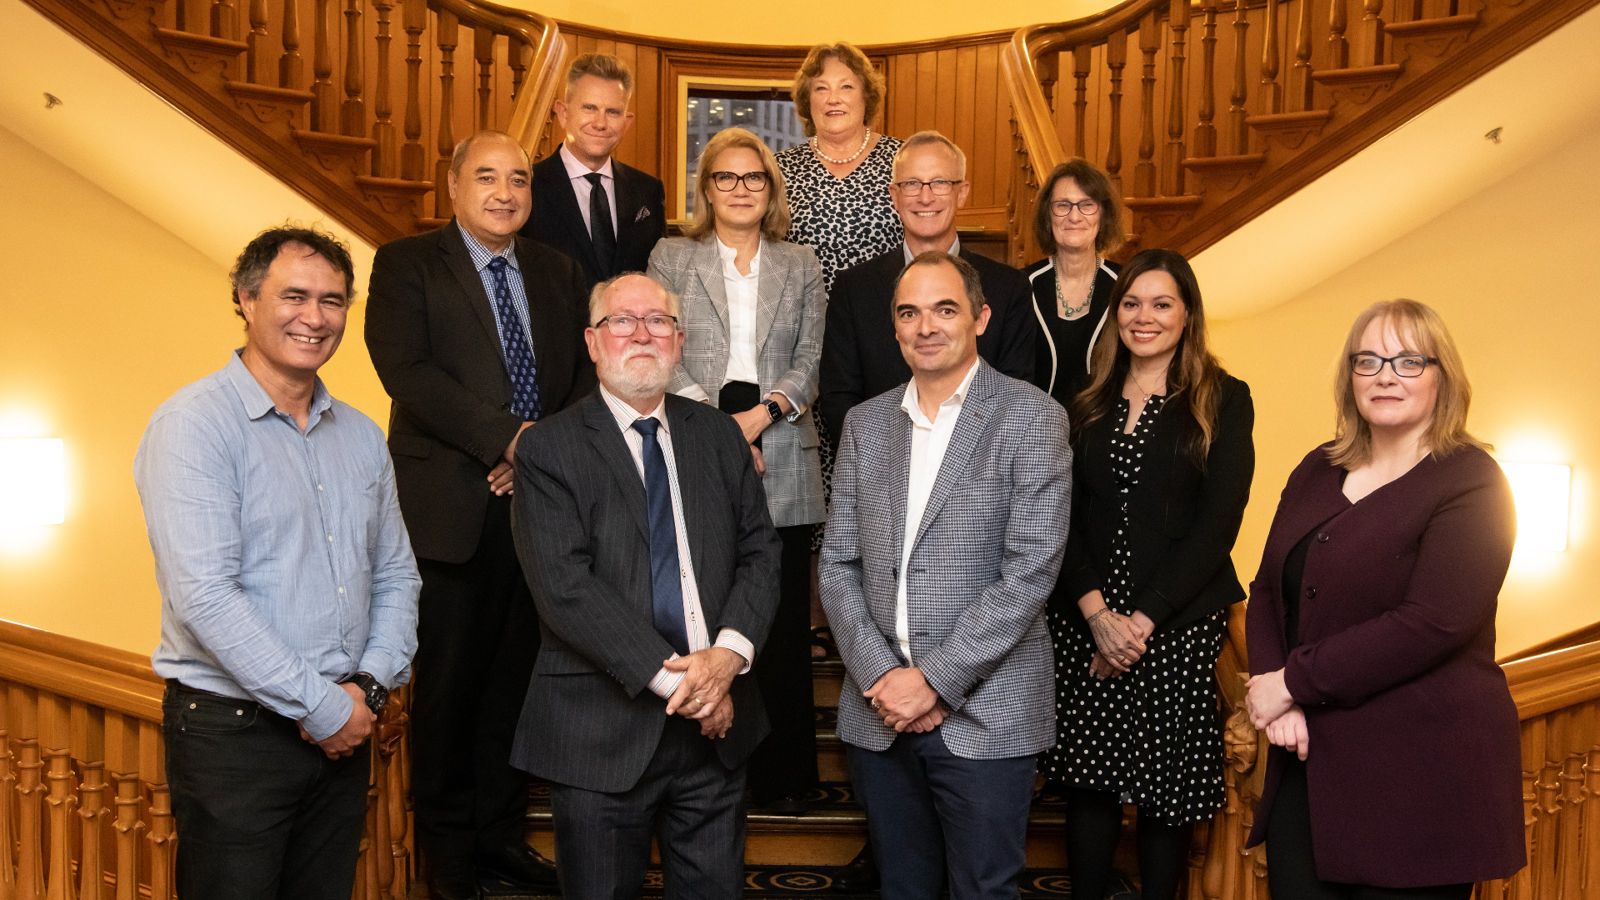 distinguished guests in attendance to the launch of the Centre for Justice Innovation standing in the staircase of the Faculty of Law Wellington